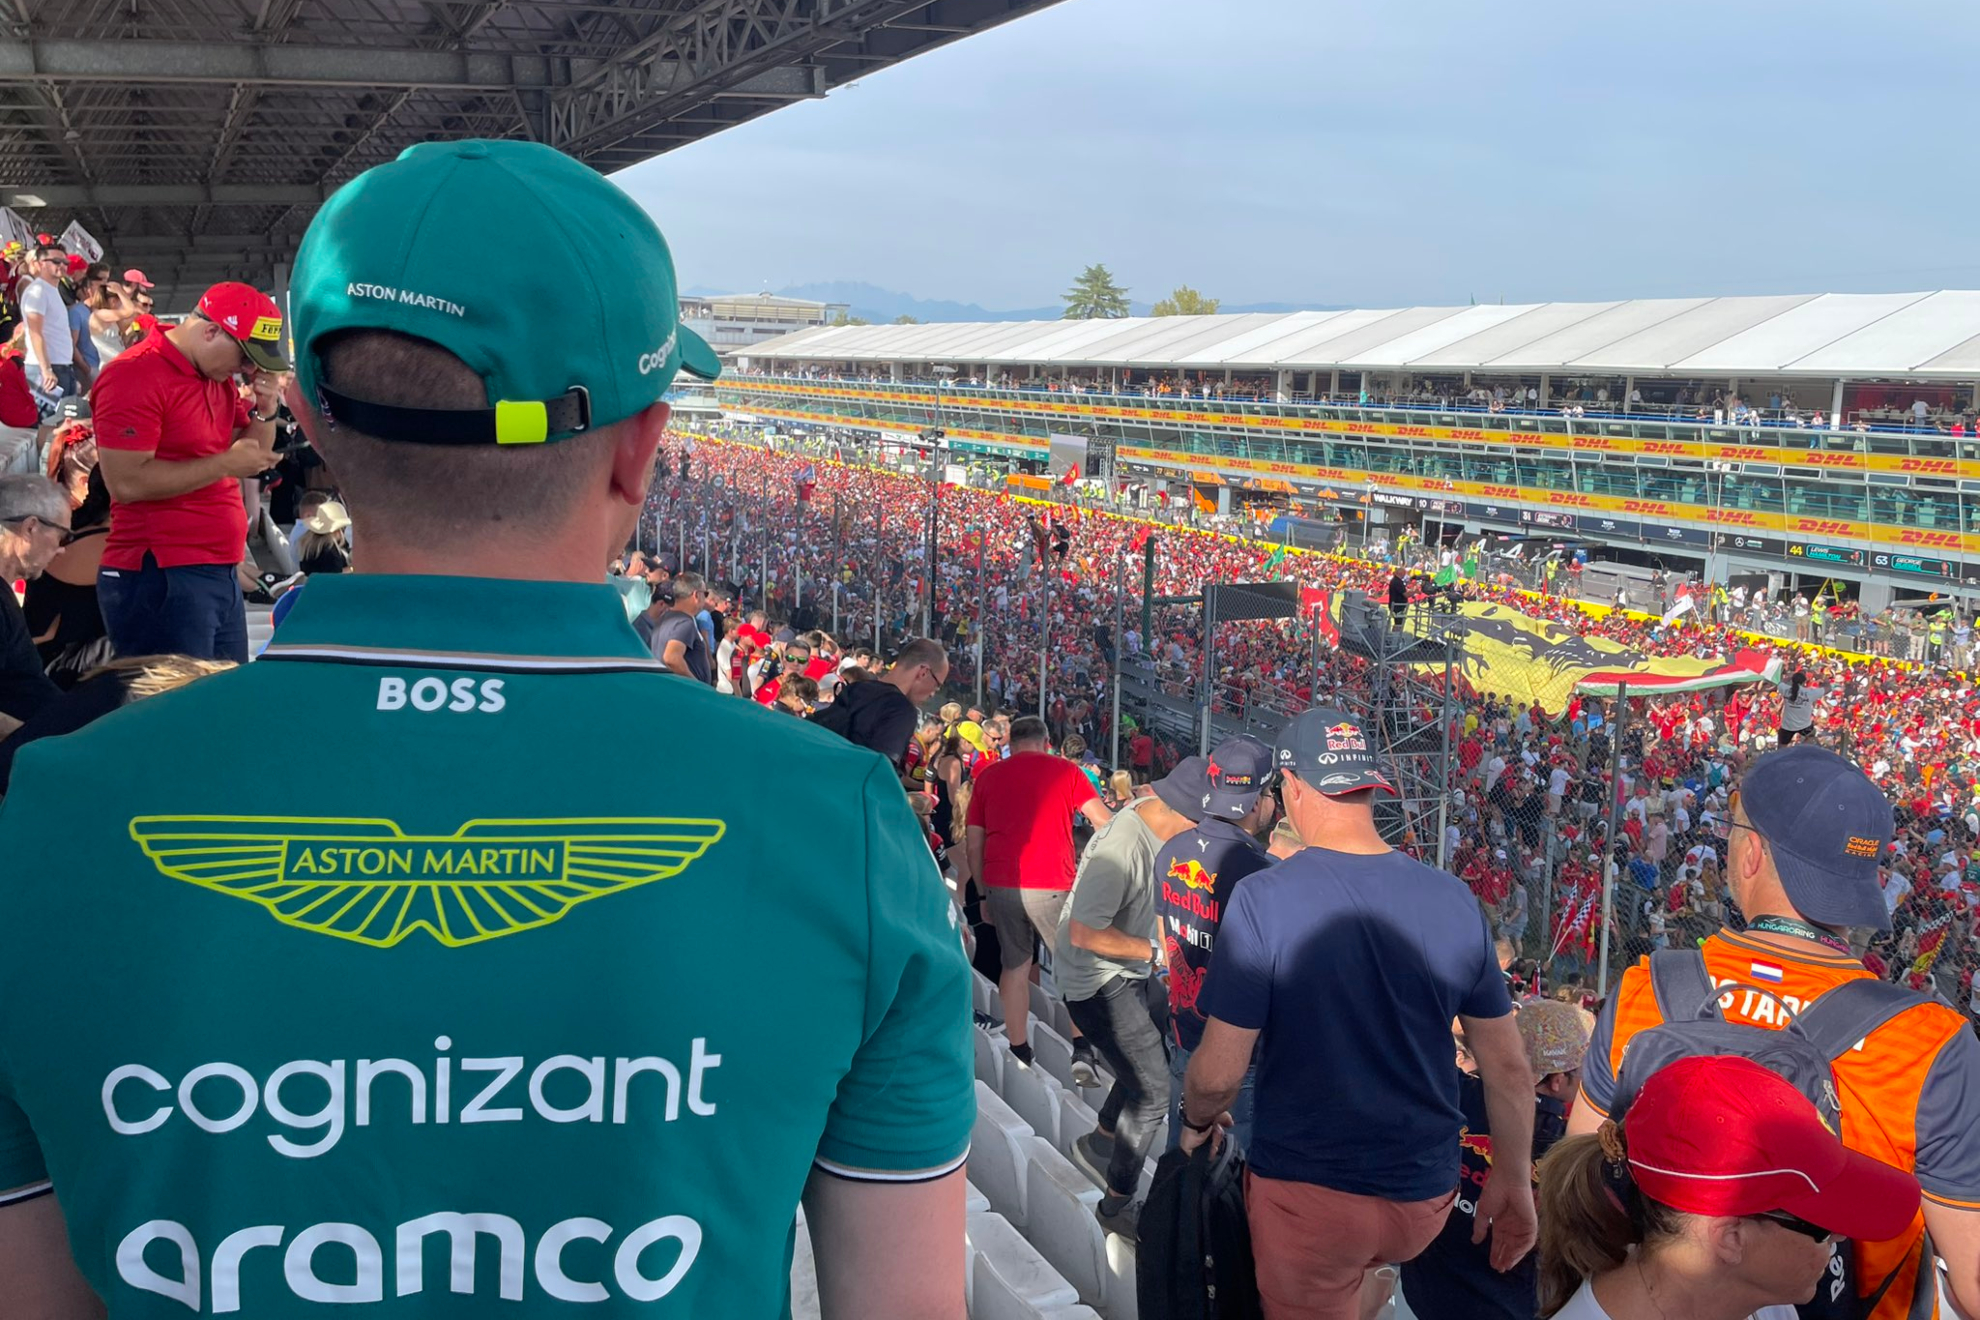 He listened to his friend and... He ended up watching Fernando Alonso at the Italian Grand Prix!